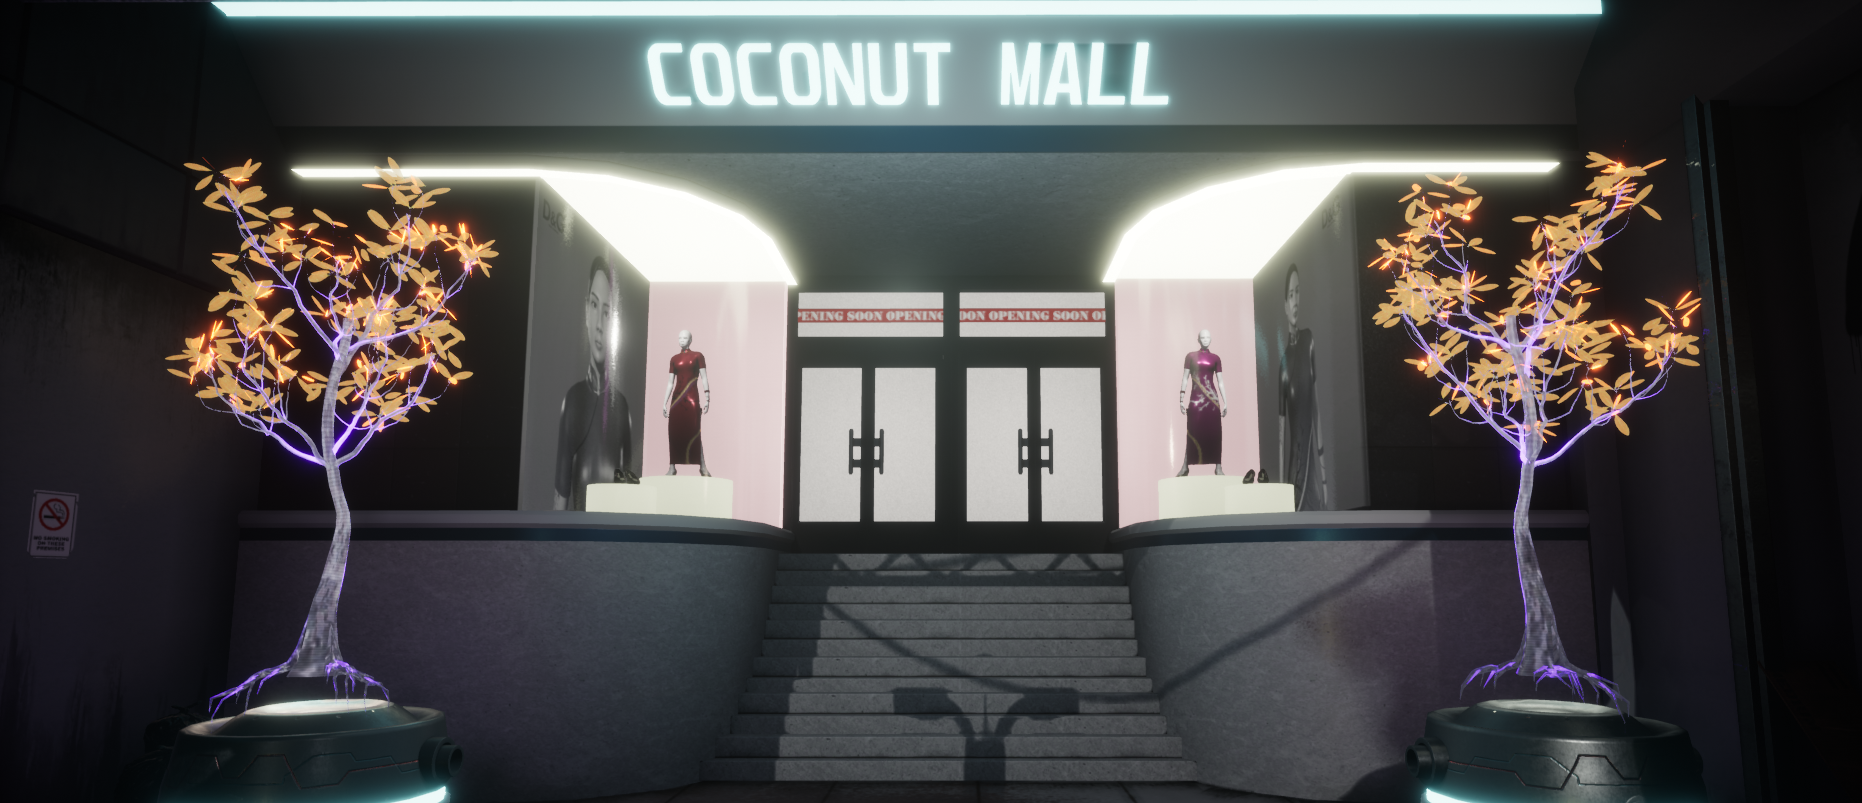 Coconut Mall Station (Technologies Impact)